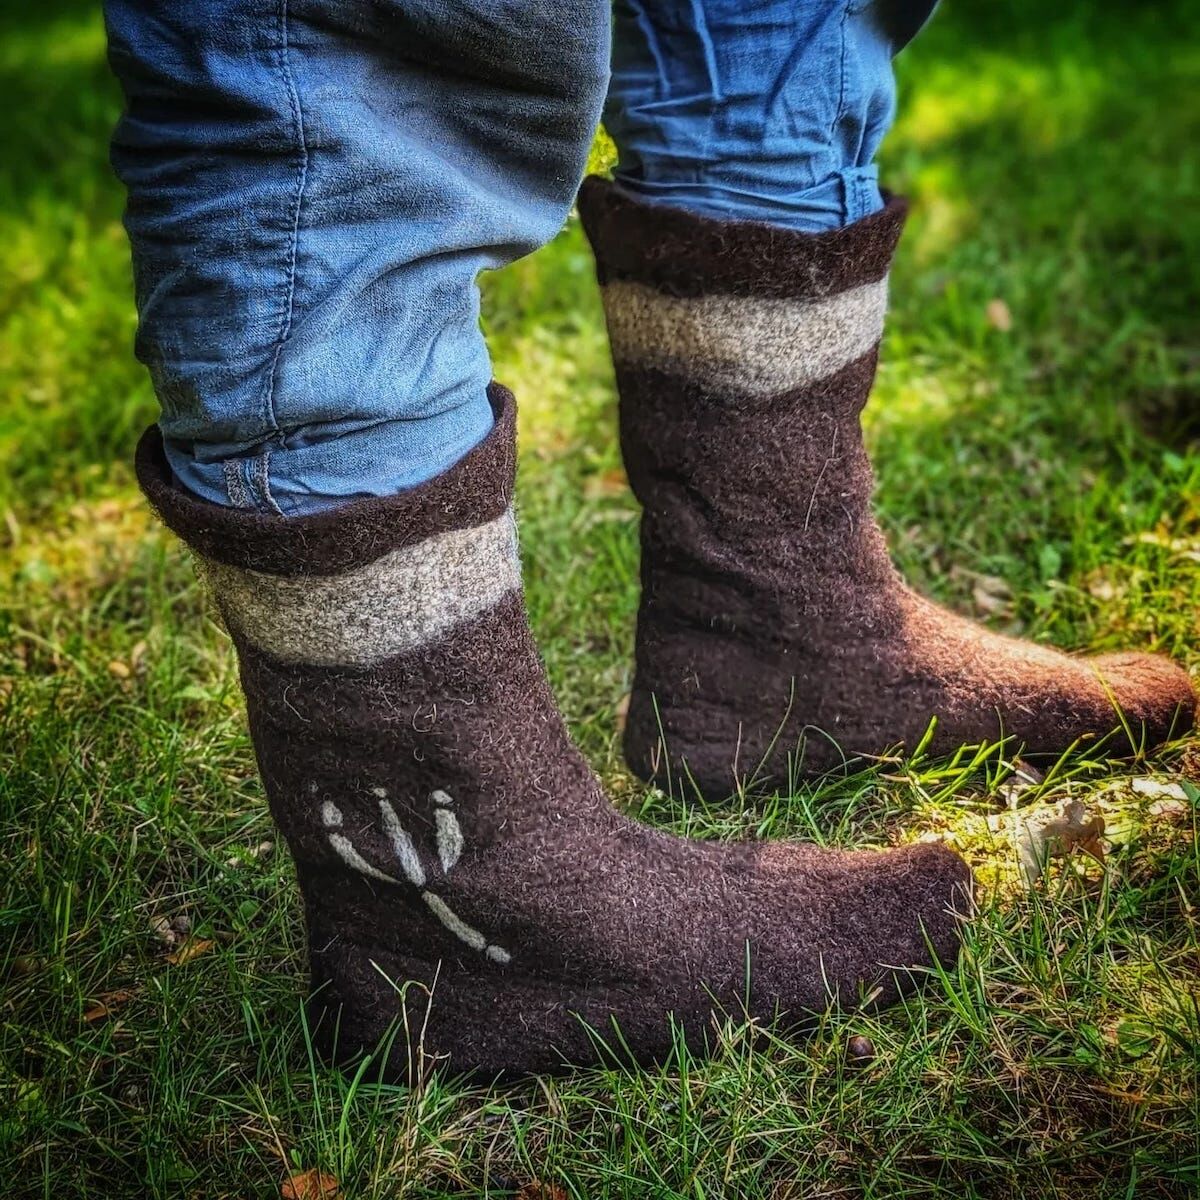 My felted wool boots